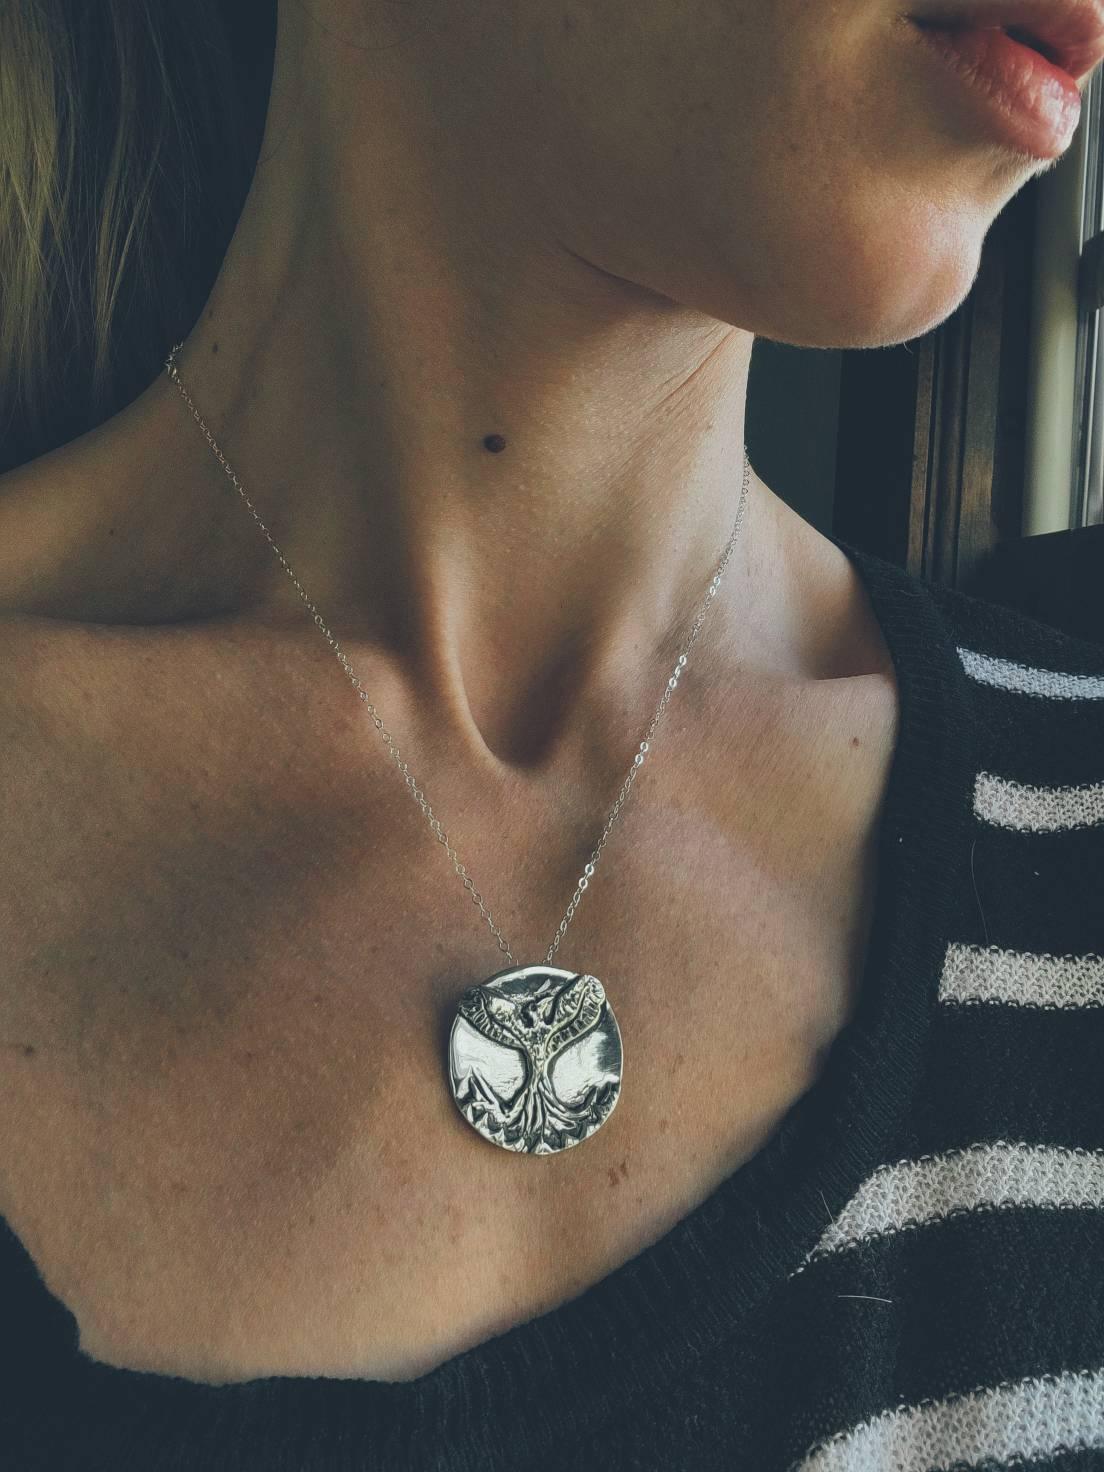 Empowering phoenix necklace for overcoming adversity